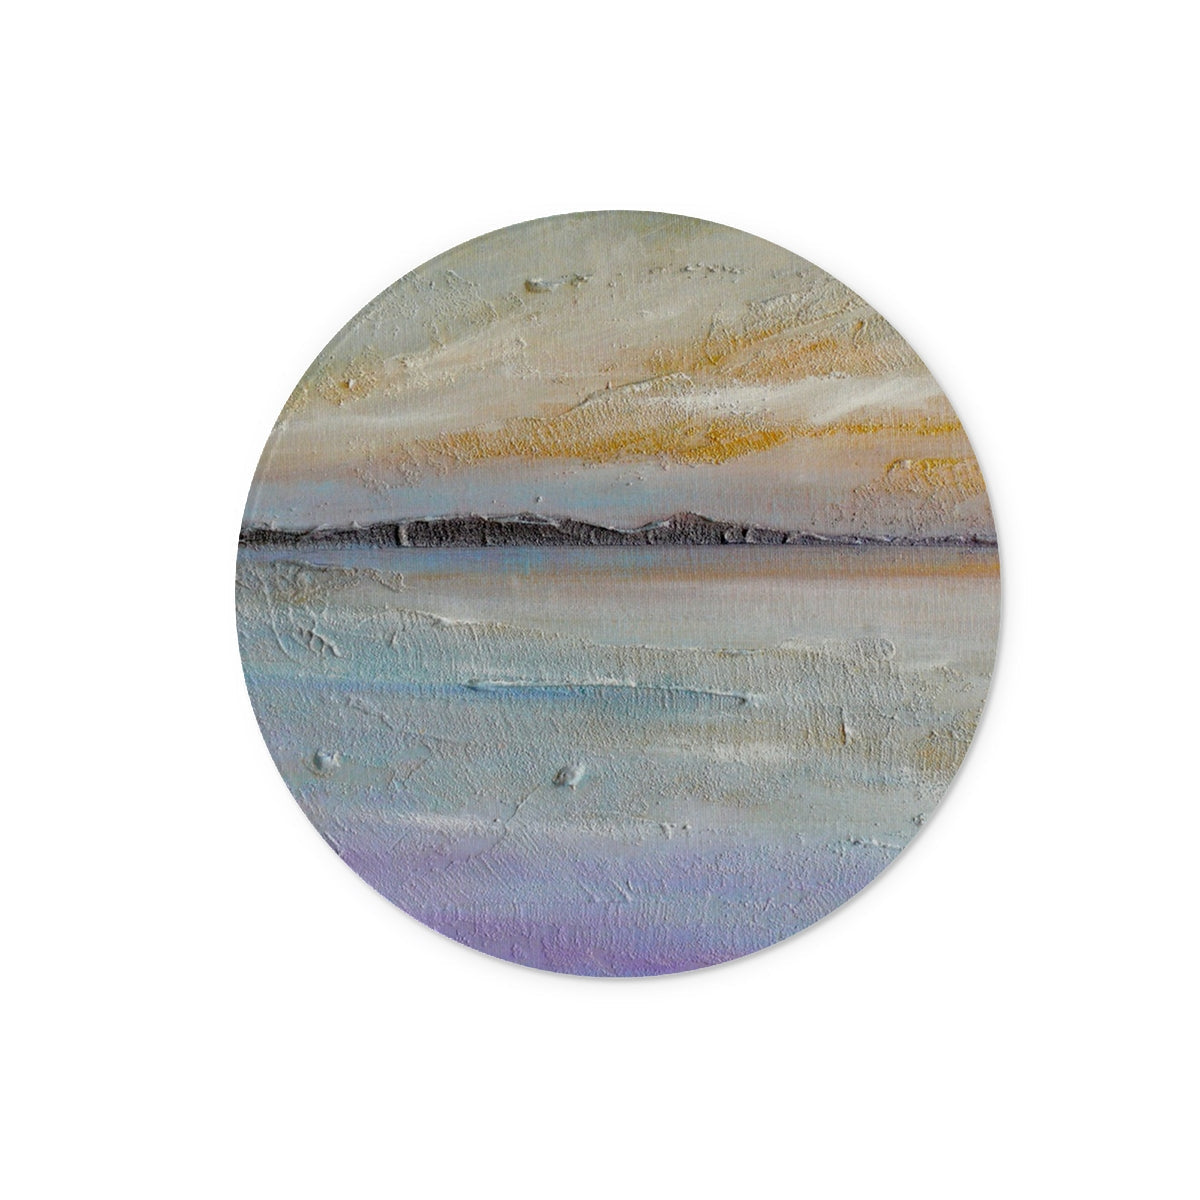 Sollas Beach North Uist Art Gifts Glass Chopping Board-Glass Chopping Boards-Hebridean Islands Art Gallery-12" Round-Paintings, Prints, Homeware, Art Gifts From Scotland By Scottish Artist Kevin Hunter